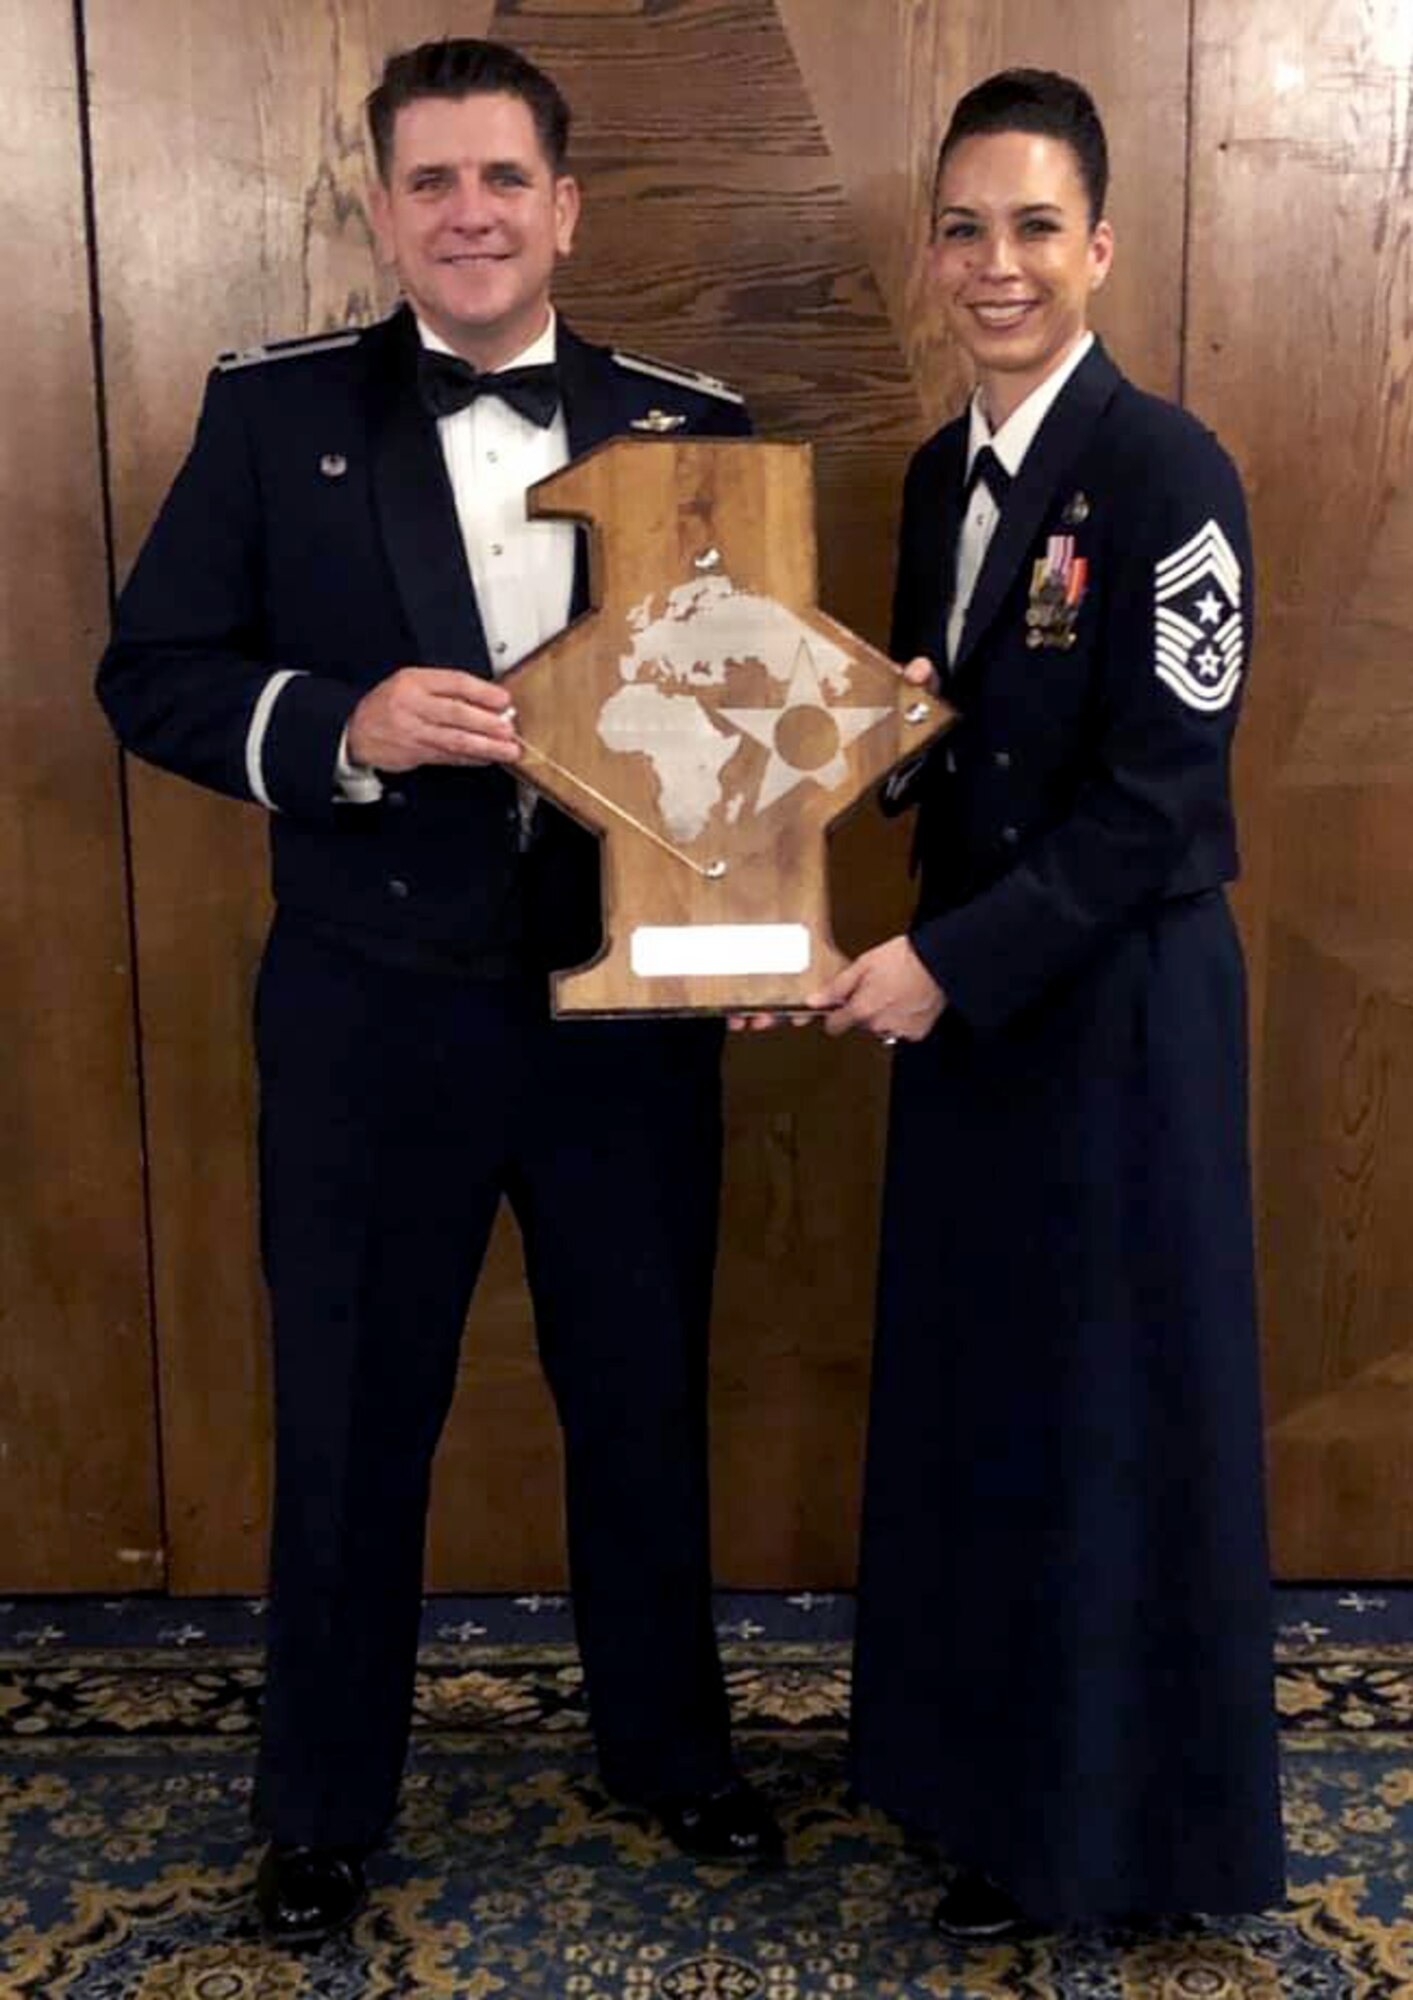 U.S. Air Force Col. Christopher Amrhein, 100th Air Refueling Wing commander, and Chief Master Sgt. Kristina Rogers, 100th ARW command chief, receive the USAFE-AFAFRICA First Sergeants Council Award on behalf of the RAF Mildenhall First Sergeant Council at Ramstein Air Base, Germany, May 9, 2019. The award was presented for the outstanding performance of the 100th ARW First Sergeants Council in improving wing morale and increasing mission effectiveness. (Courtesy photo)